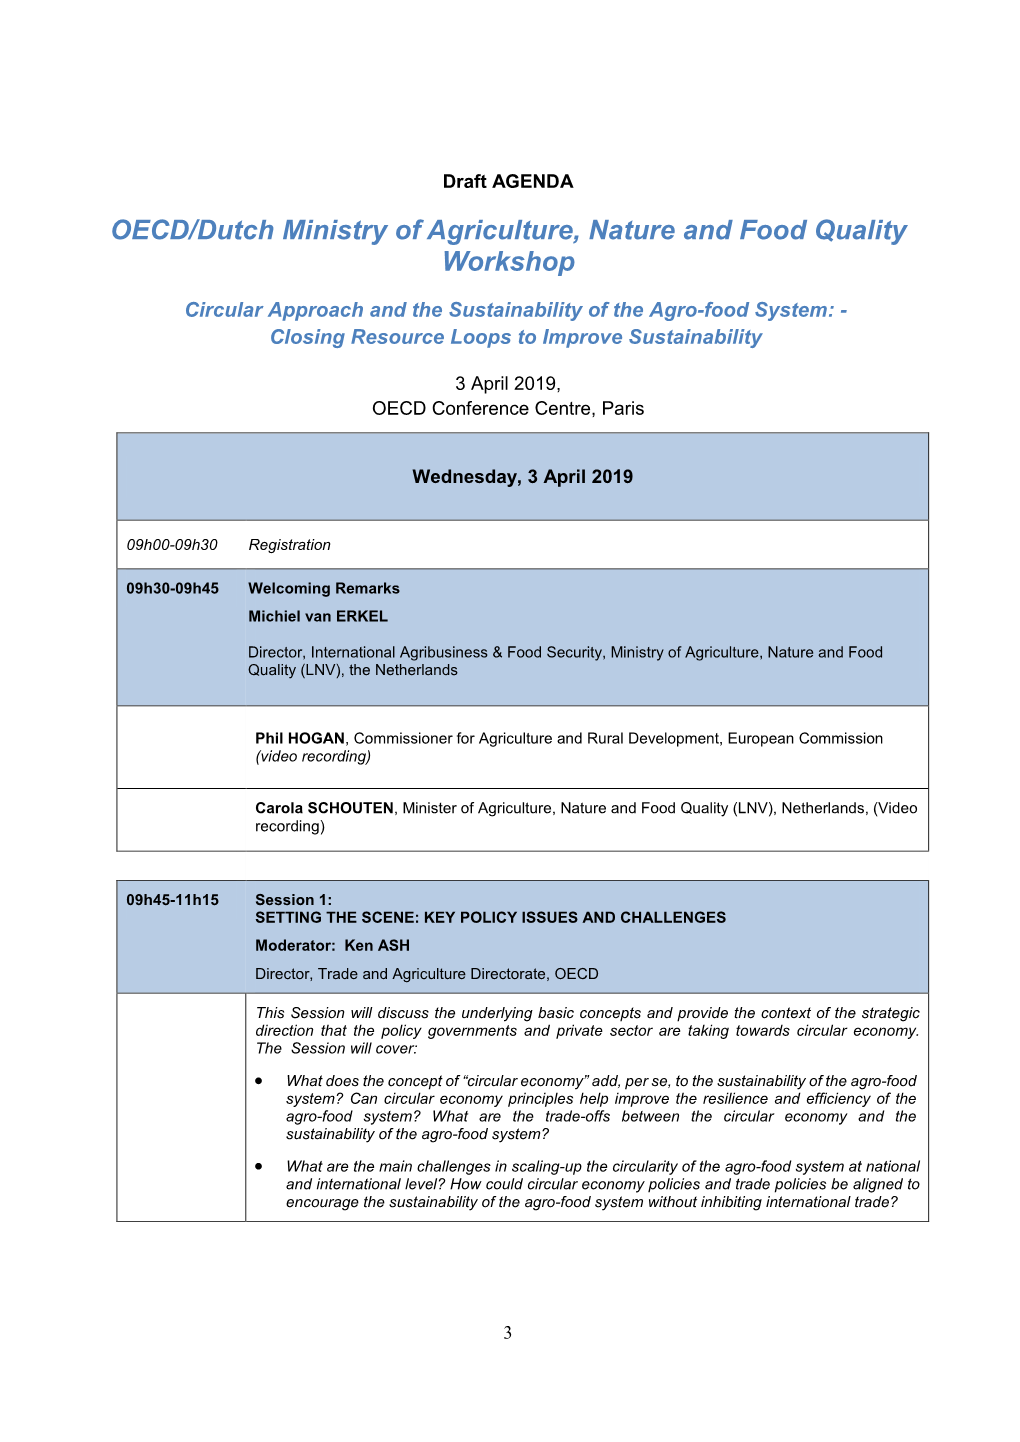 OECD/Dutch Ministry of Agriculture, Nature and Food Quality Workshop